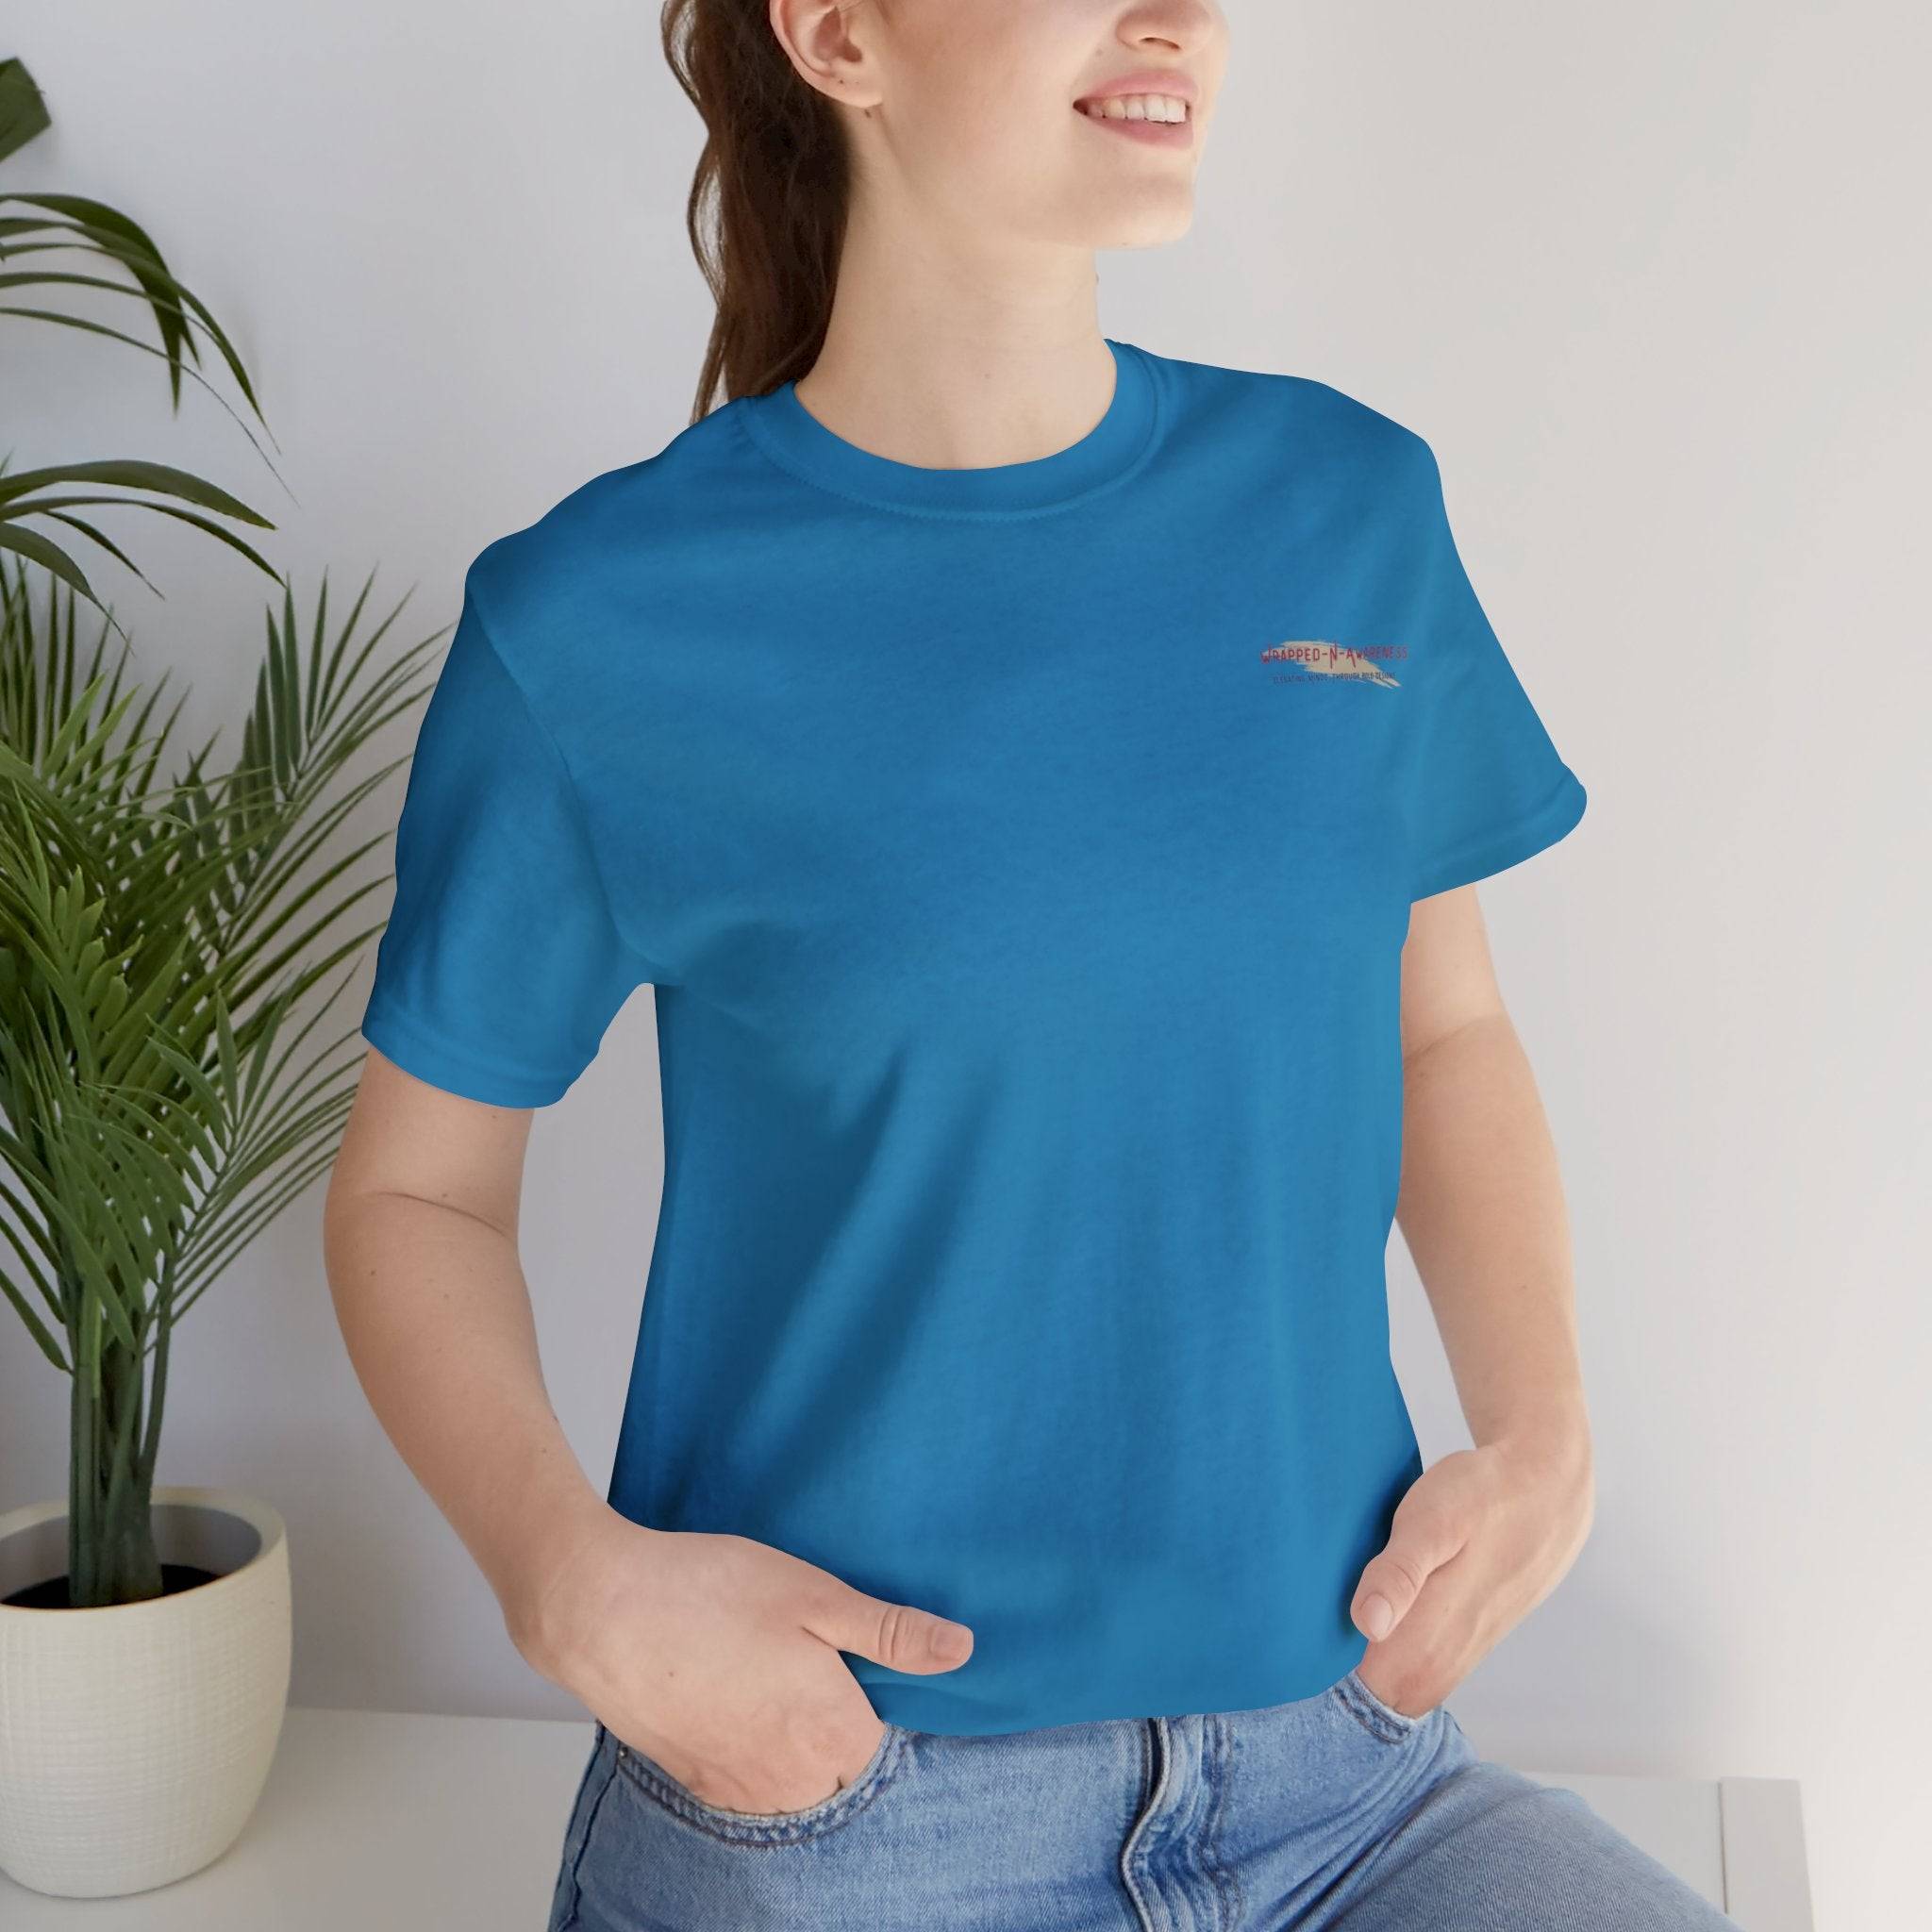 Embrace Self-Care Jersey Tee - Bella+Canvas 3001 Heather Mauve Airlume Cotton Bella+Canvas 3001 Crew Neckline Jersey Short Sleeve Lightweight Fabric Mental Health Support Retail Fit Tear-away Label Tee Unisex Tee T-Shirt 4384277995095216397_2048_3a81c56c-c49f-4873-ab08-2b3fd6ae3c31 Printify